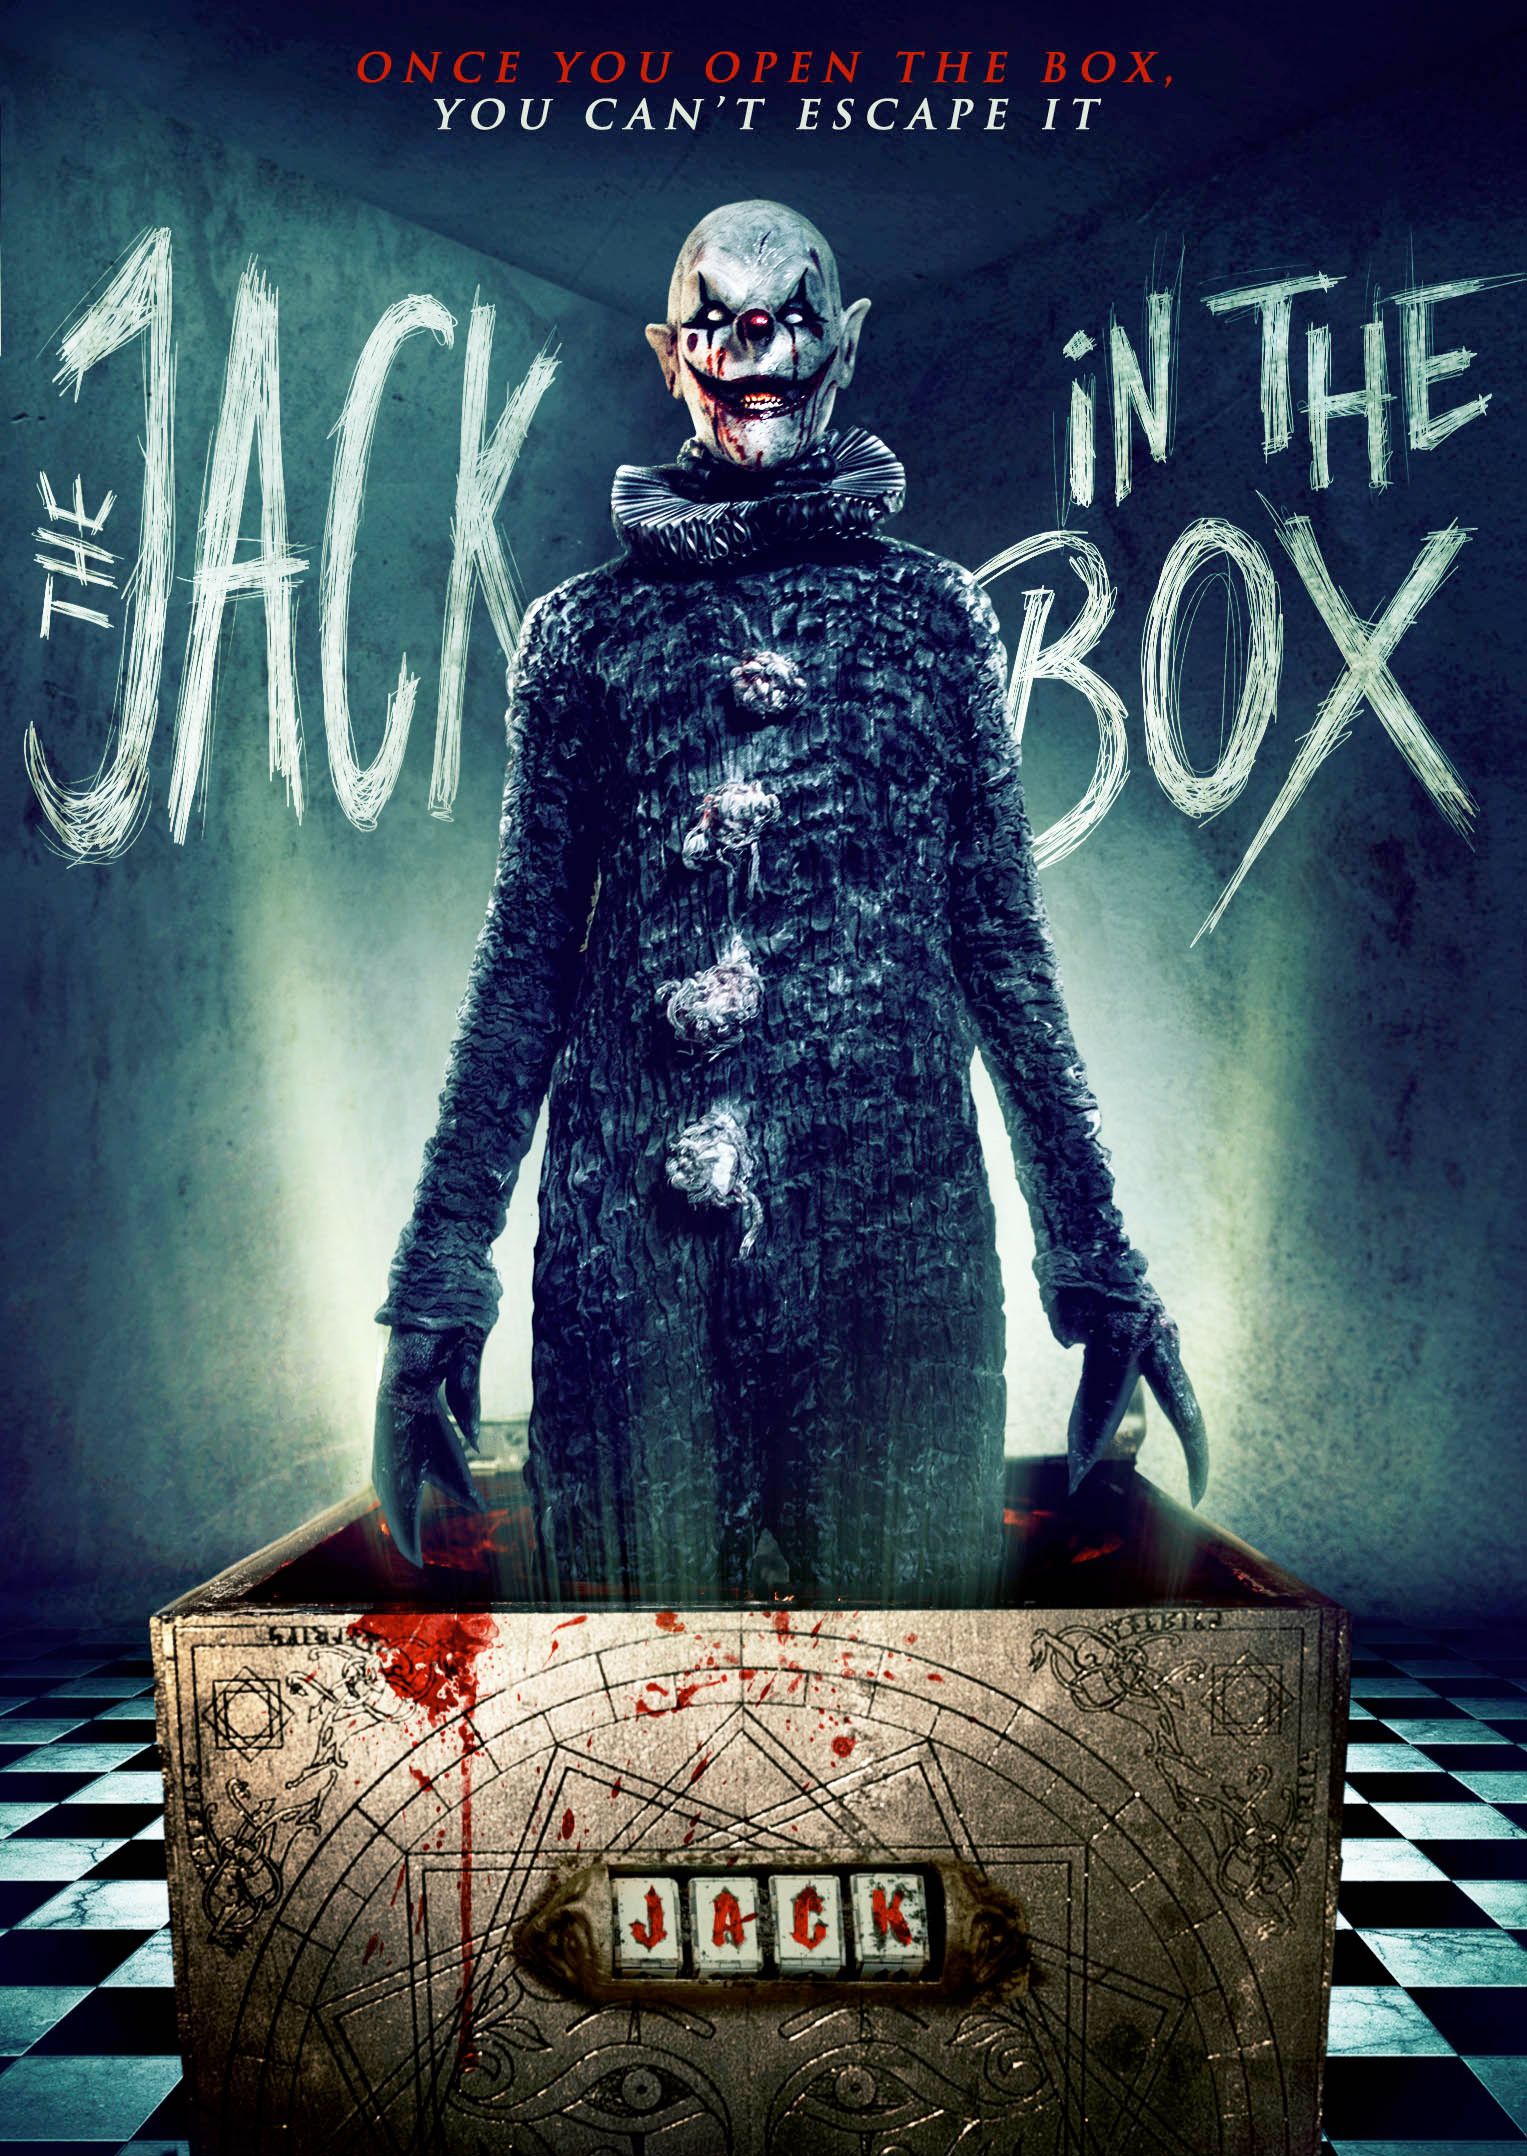 The Jack in the Box movie poster